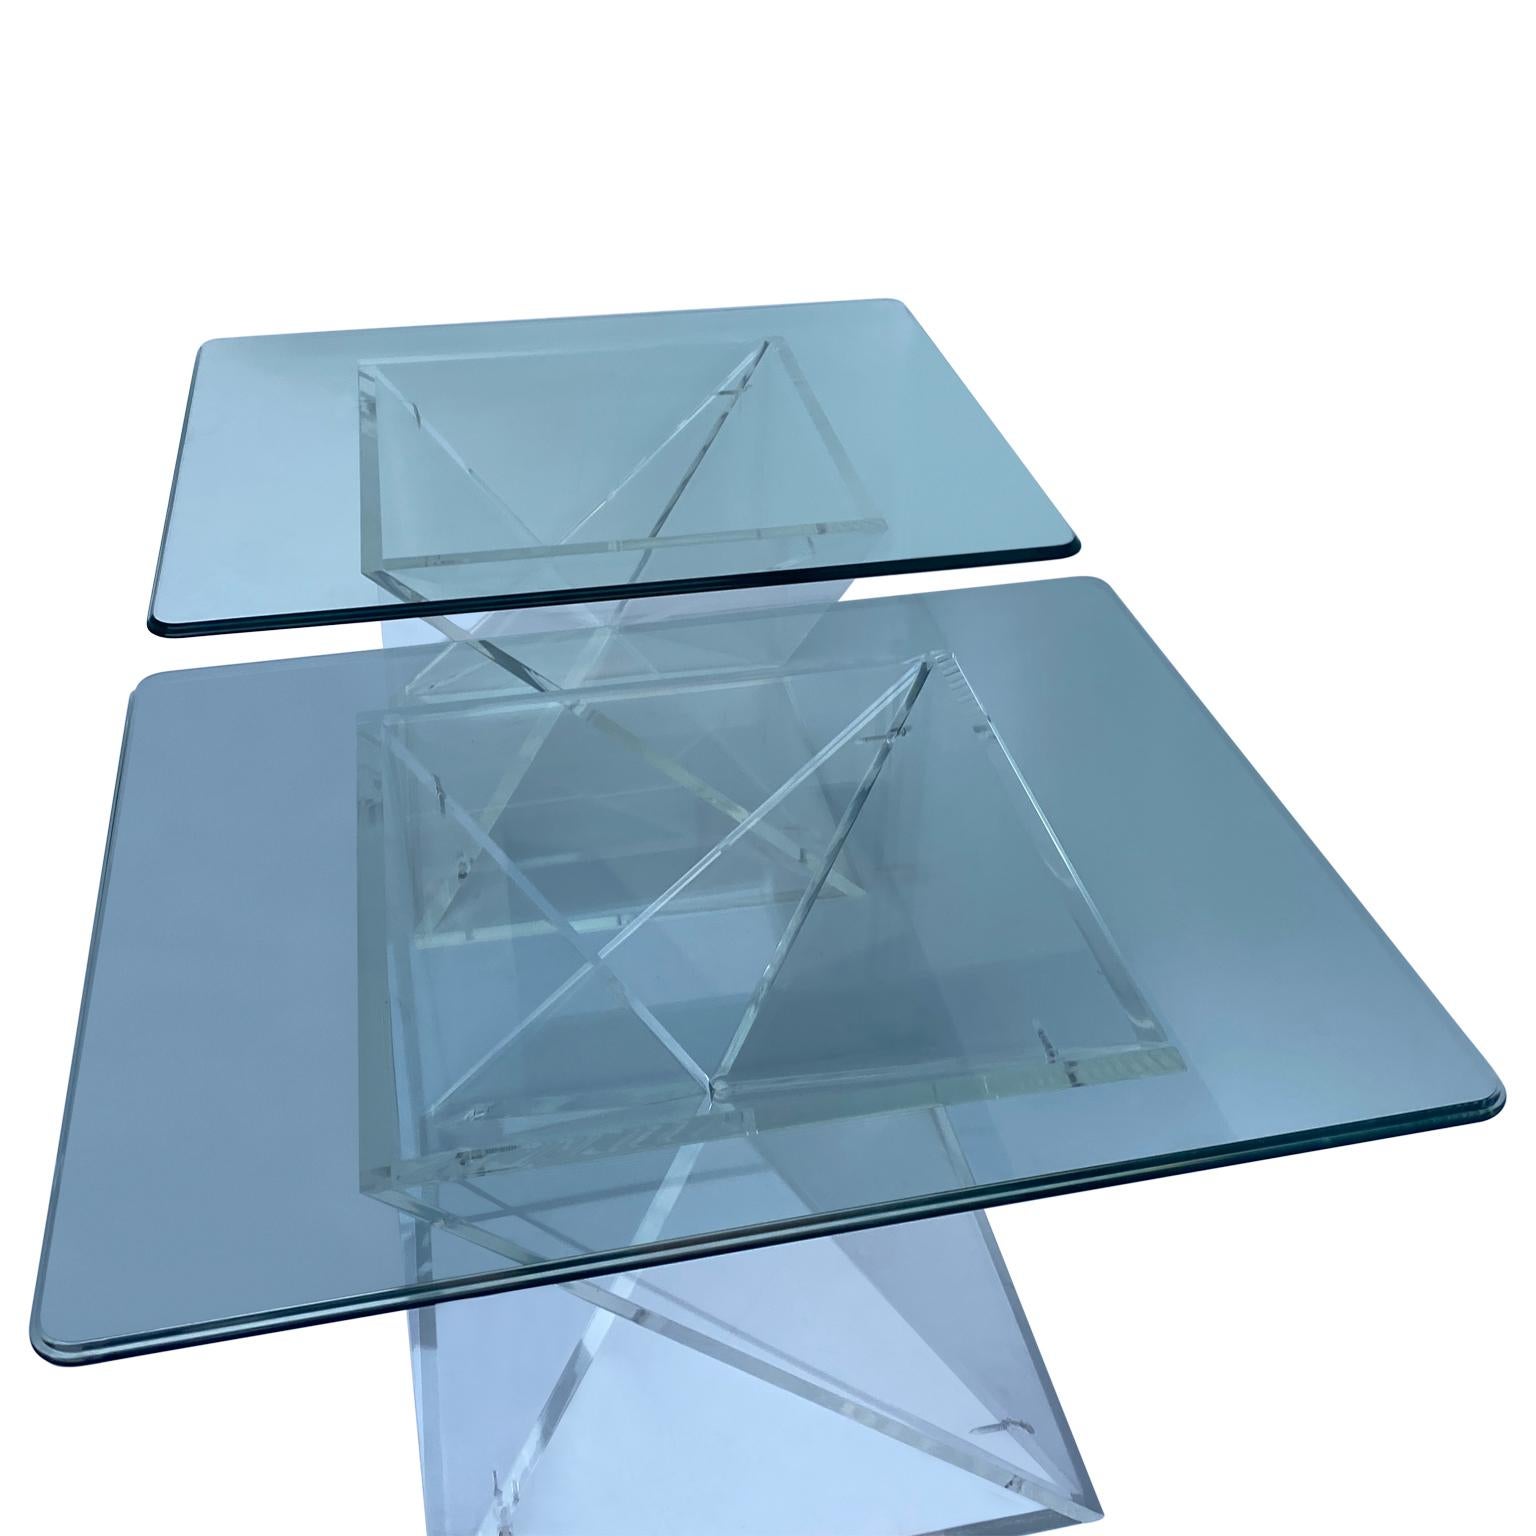 Pair of Small Square Mid-Century Modern Lucite Side Table Bases In Good Condition For Sale In Haddonfield, NJ